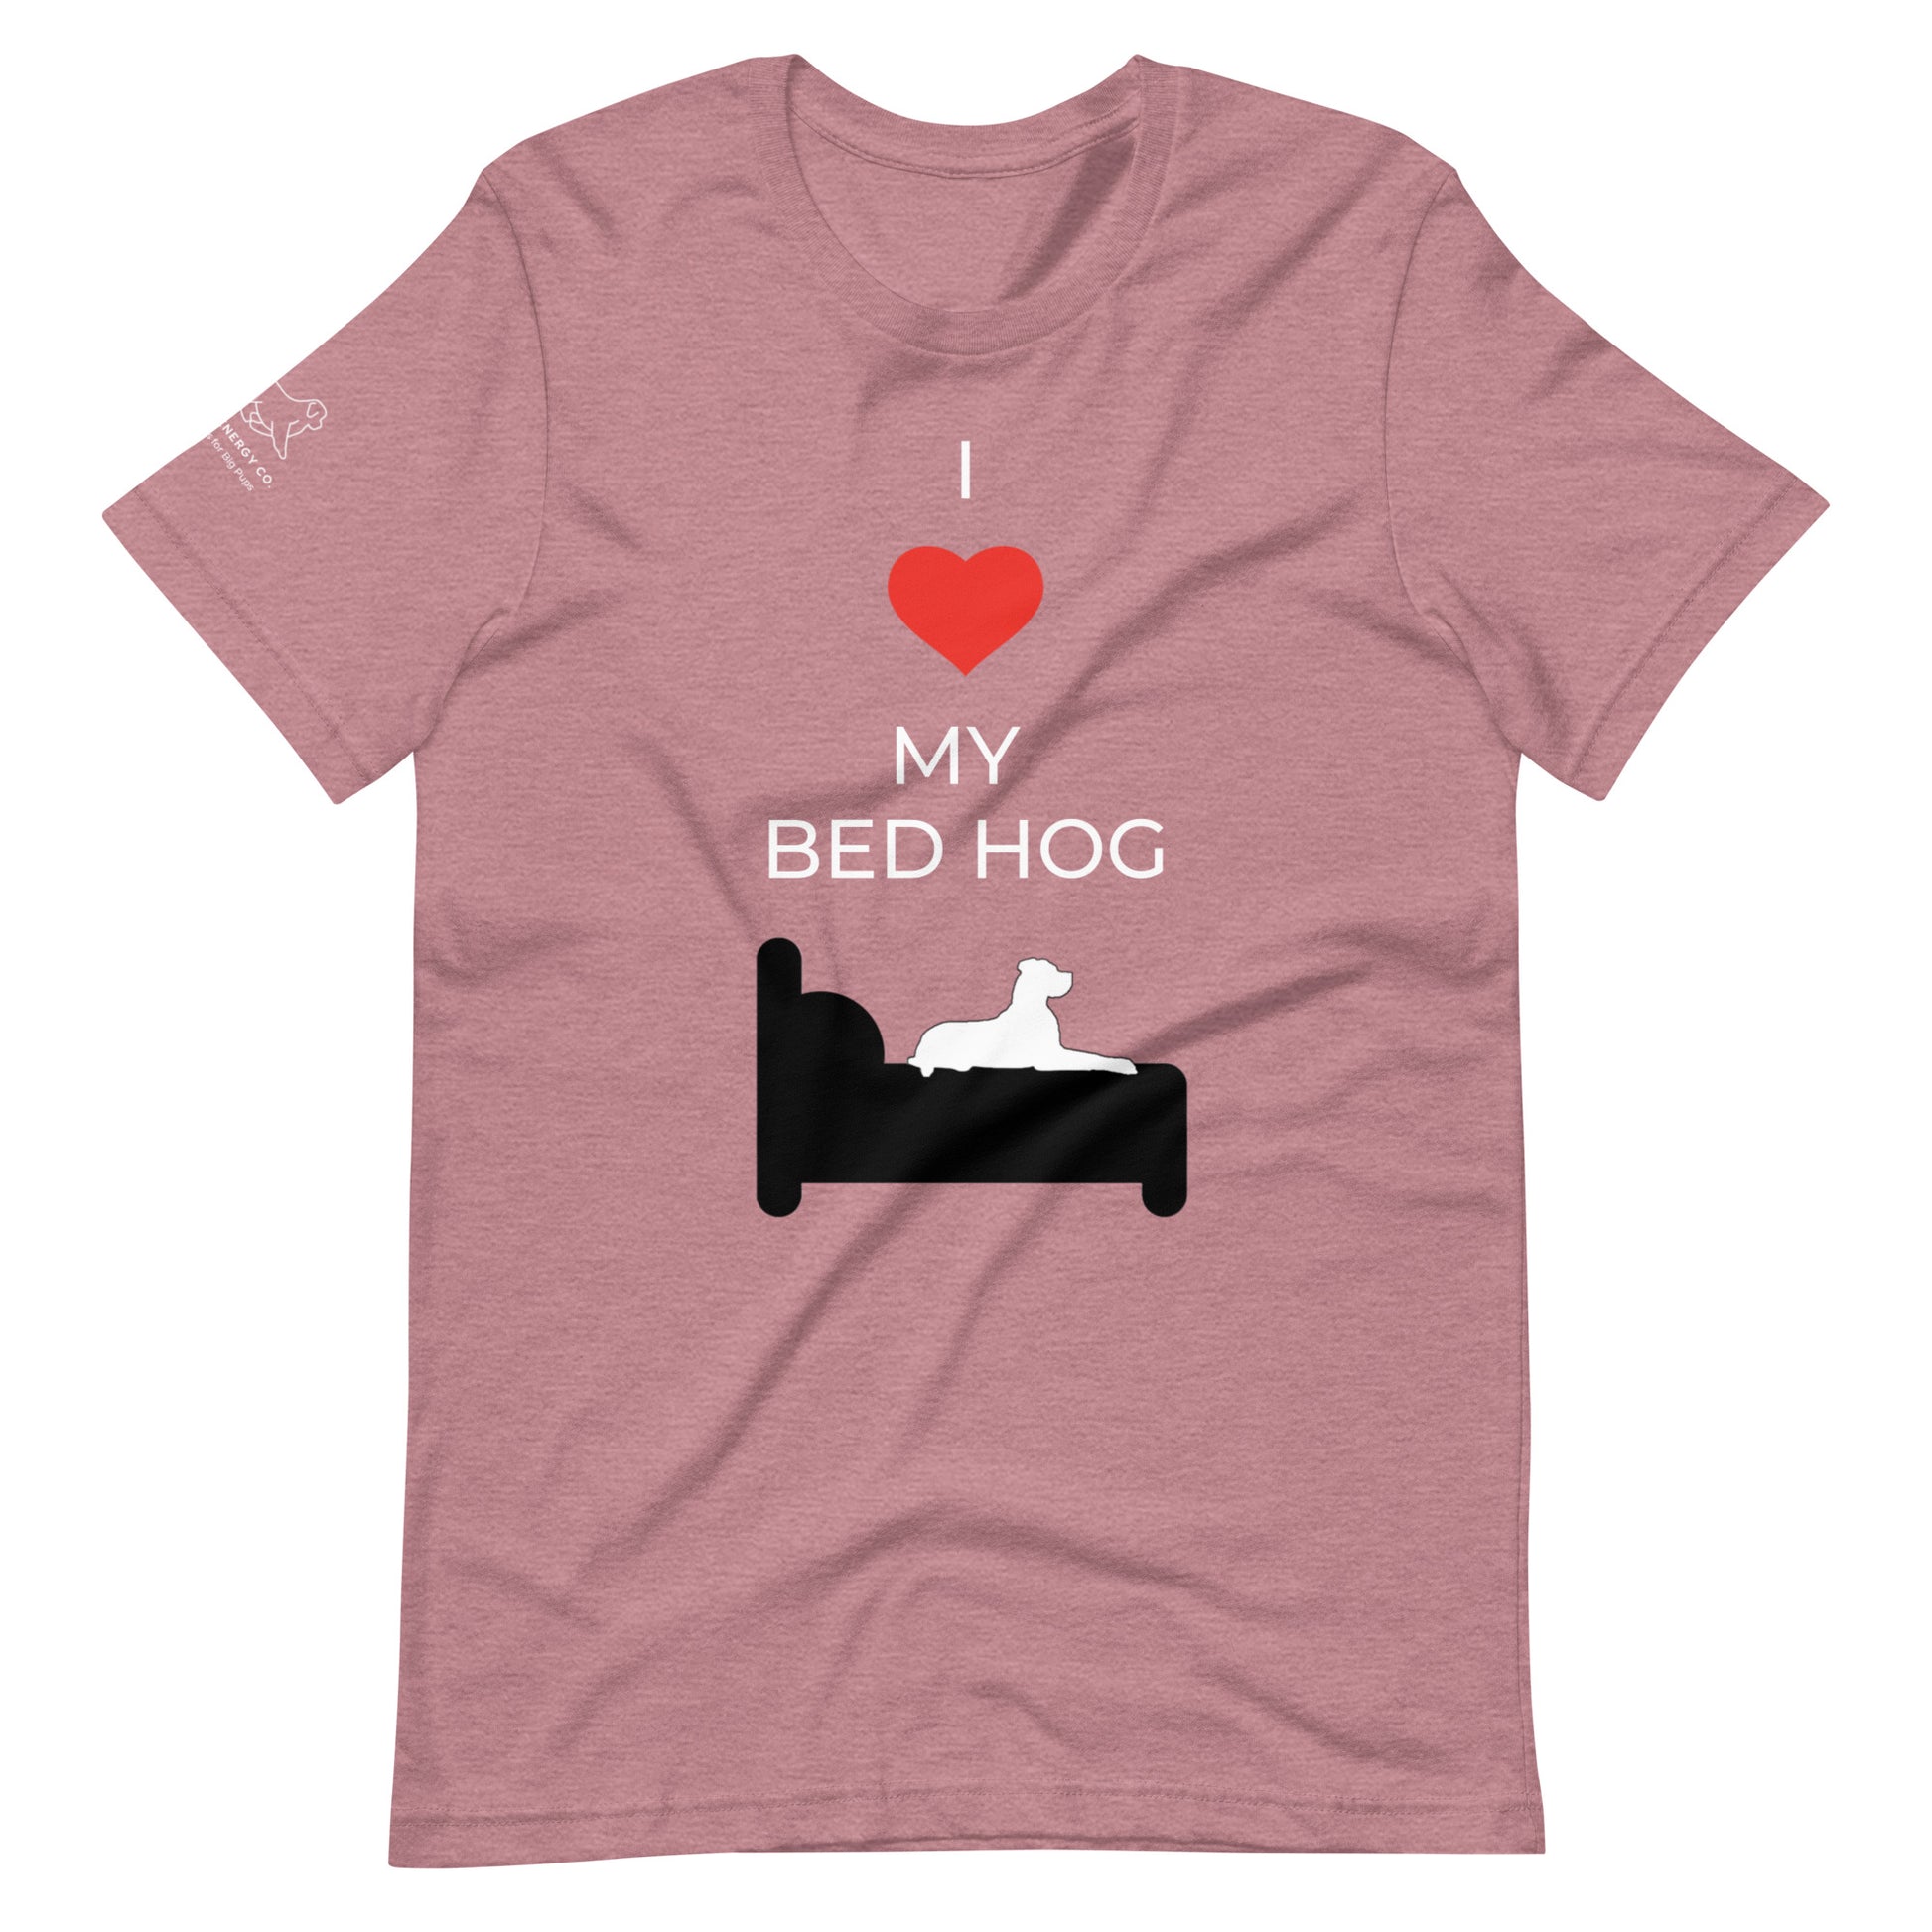 Front of a heather orchid pink t-shirt that reads "I love my bed hog" in white text over an illustration that is the white silhouette of a large dog laying on the dark silhouette of a bed. The word "love" is replaced by a red heart symbol.